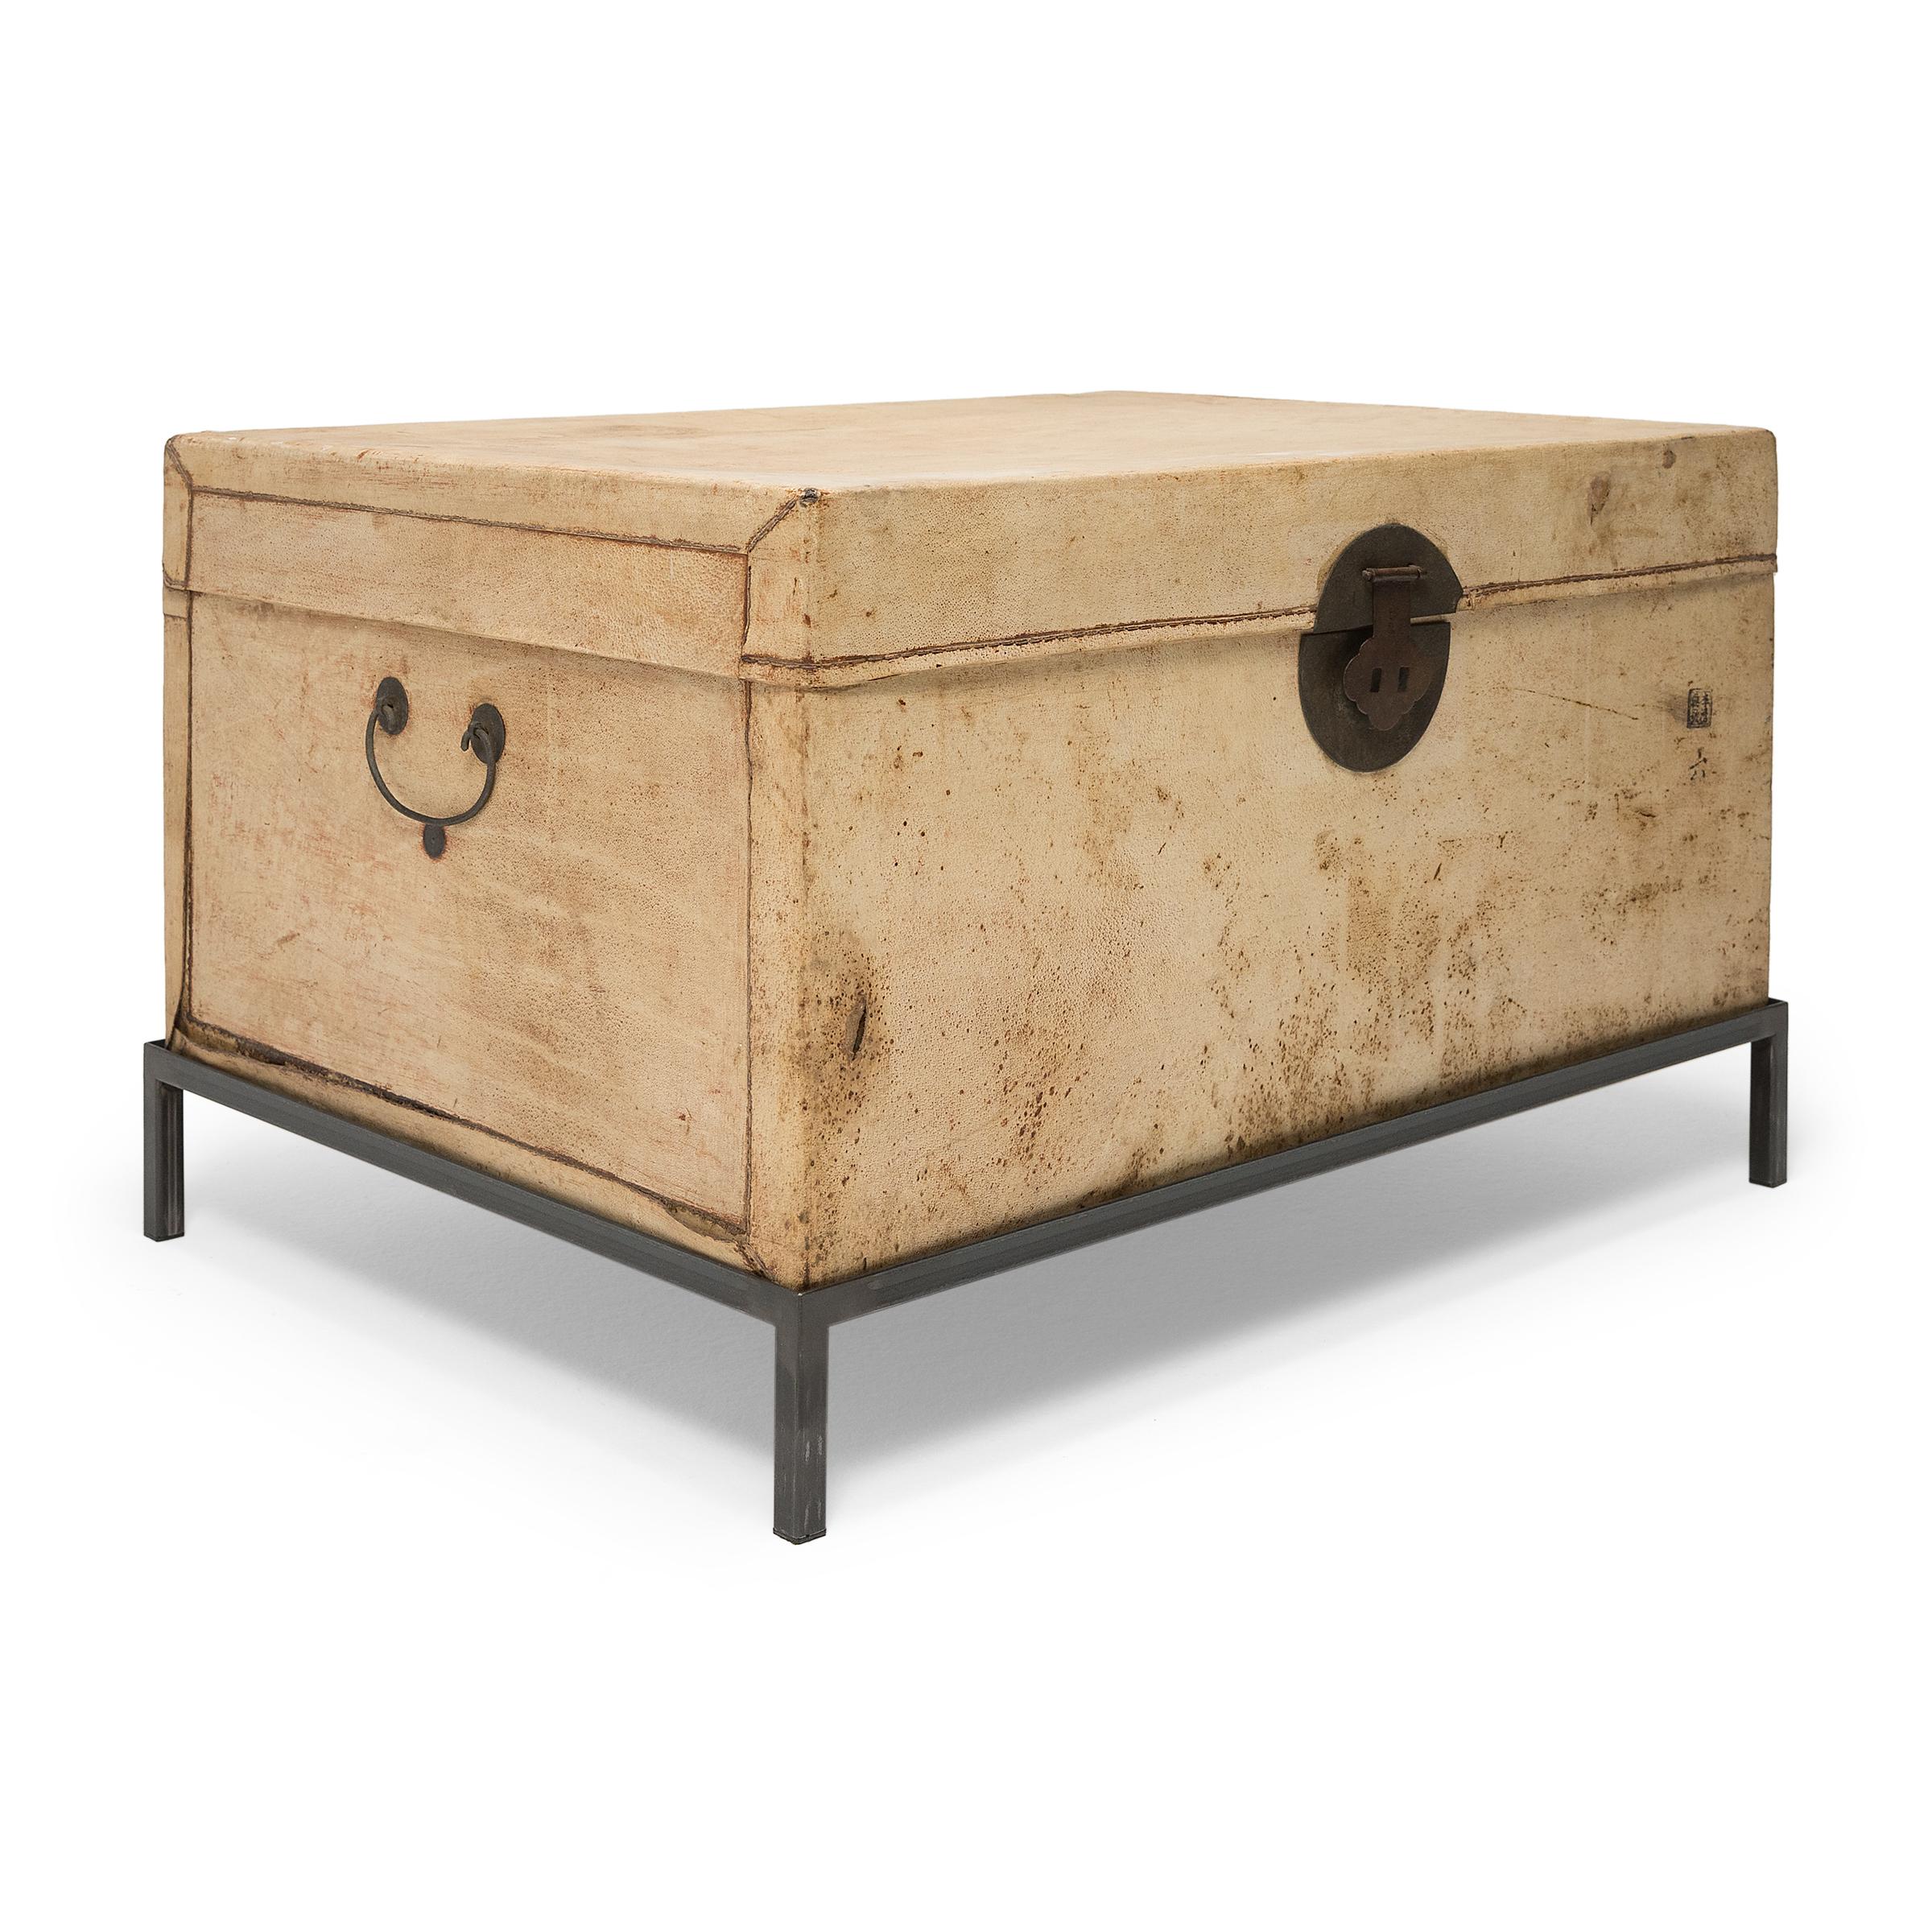 Trunks and storage chests were the most ubiquitous form of household storage throughout the Ming and Qing dynasties. Used to store clothes, linens, kitchen utensils, and other miscellaneous items, trunks were found in every room in the home and were